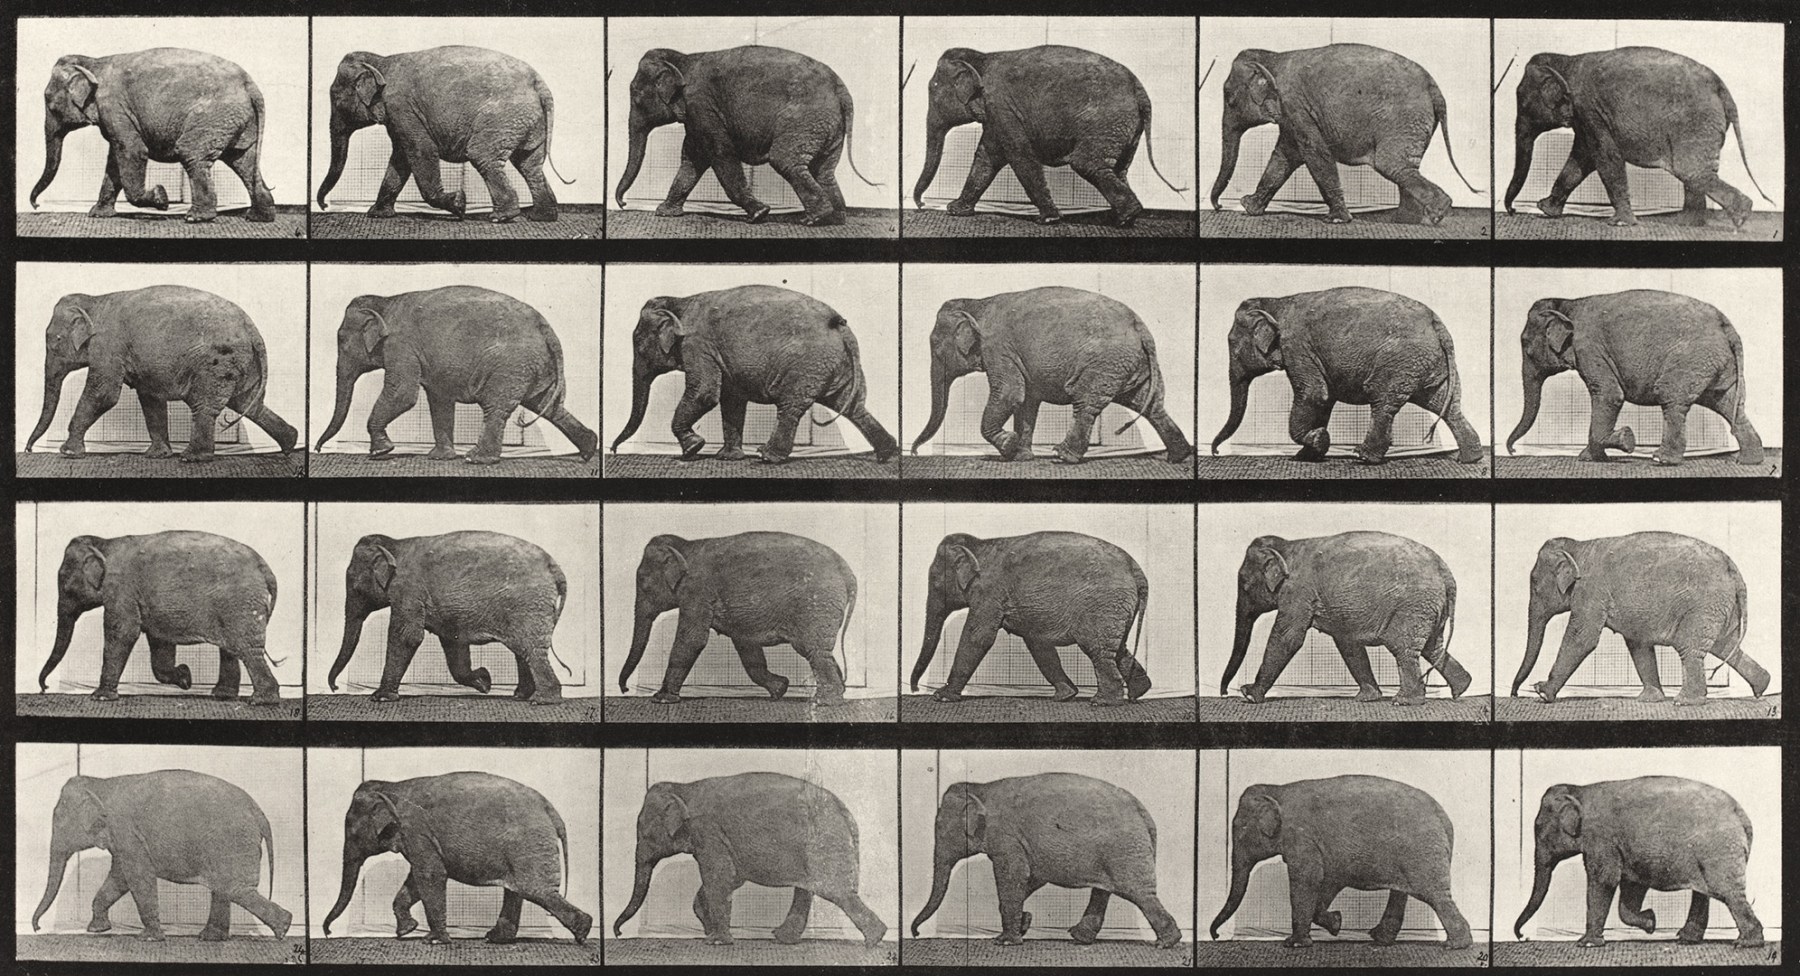 Sequence of black and white photos showing movements of a walking elephant.